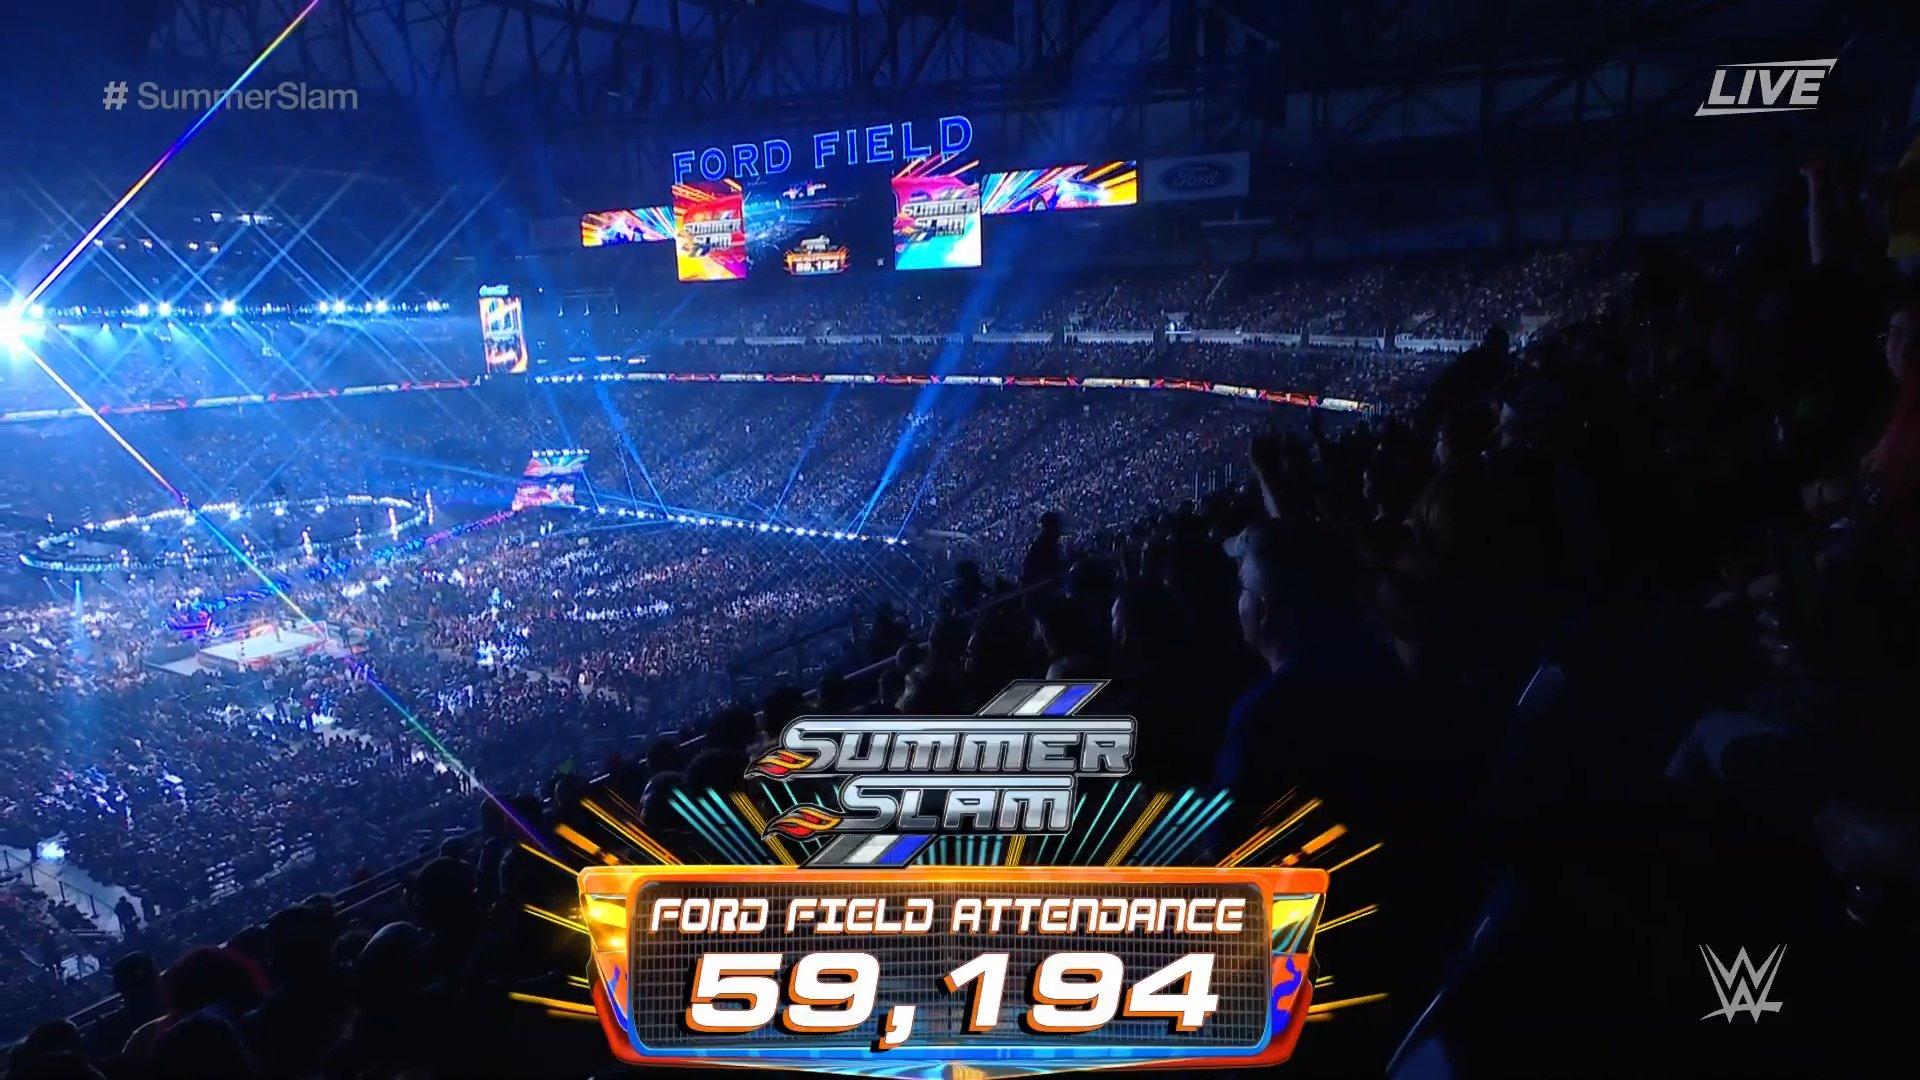 A screen shot of the announced attendance for WWE SummerSlam at Ford Field in Detroit.